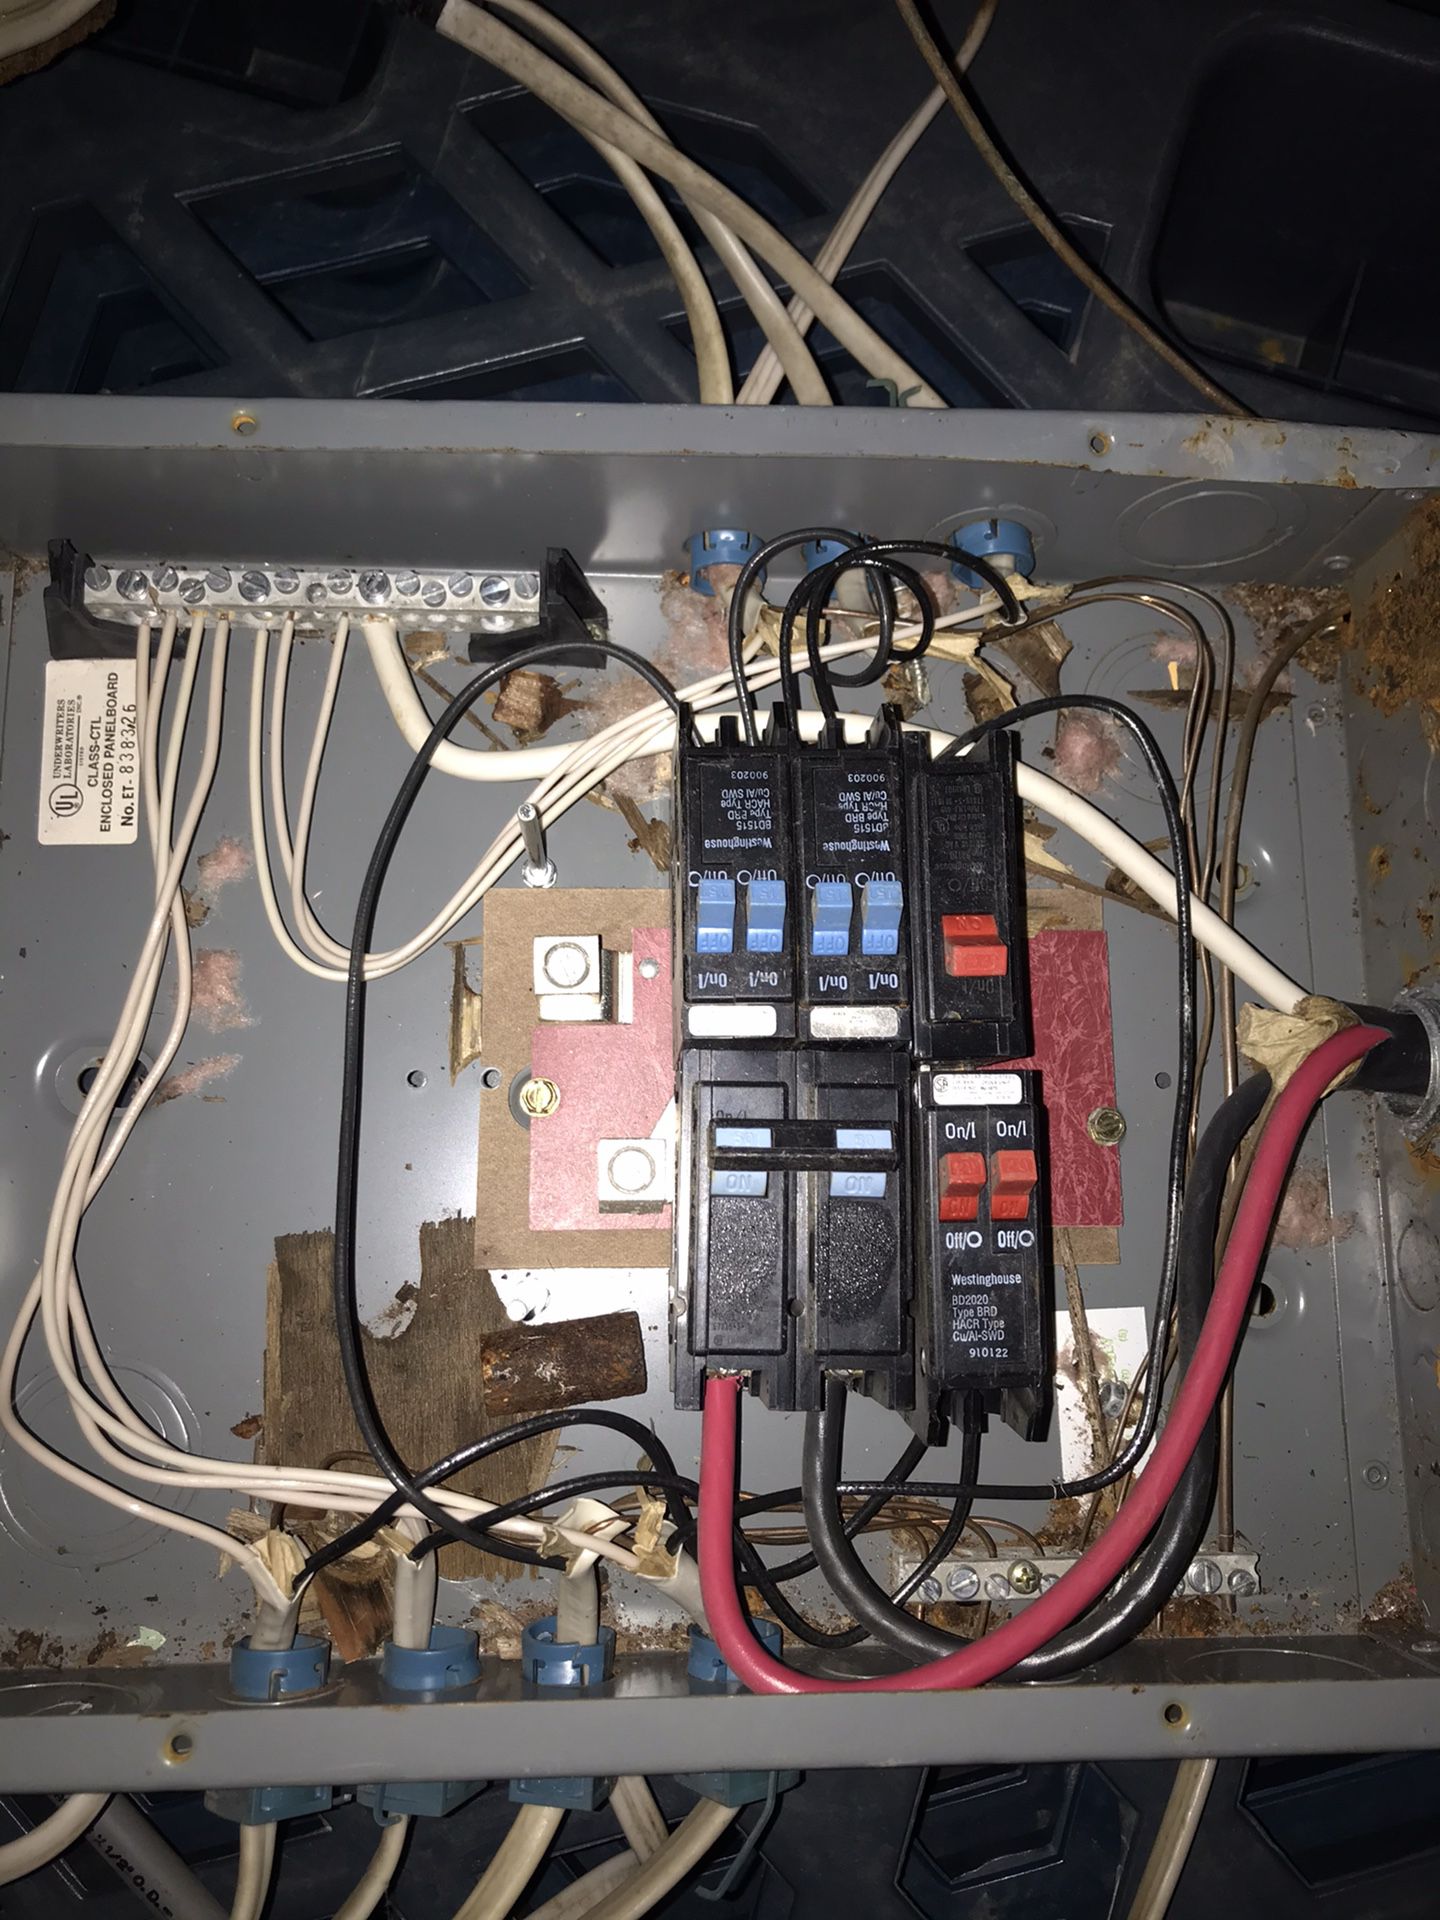 Electrical box for a RV